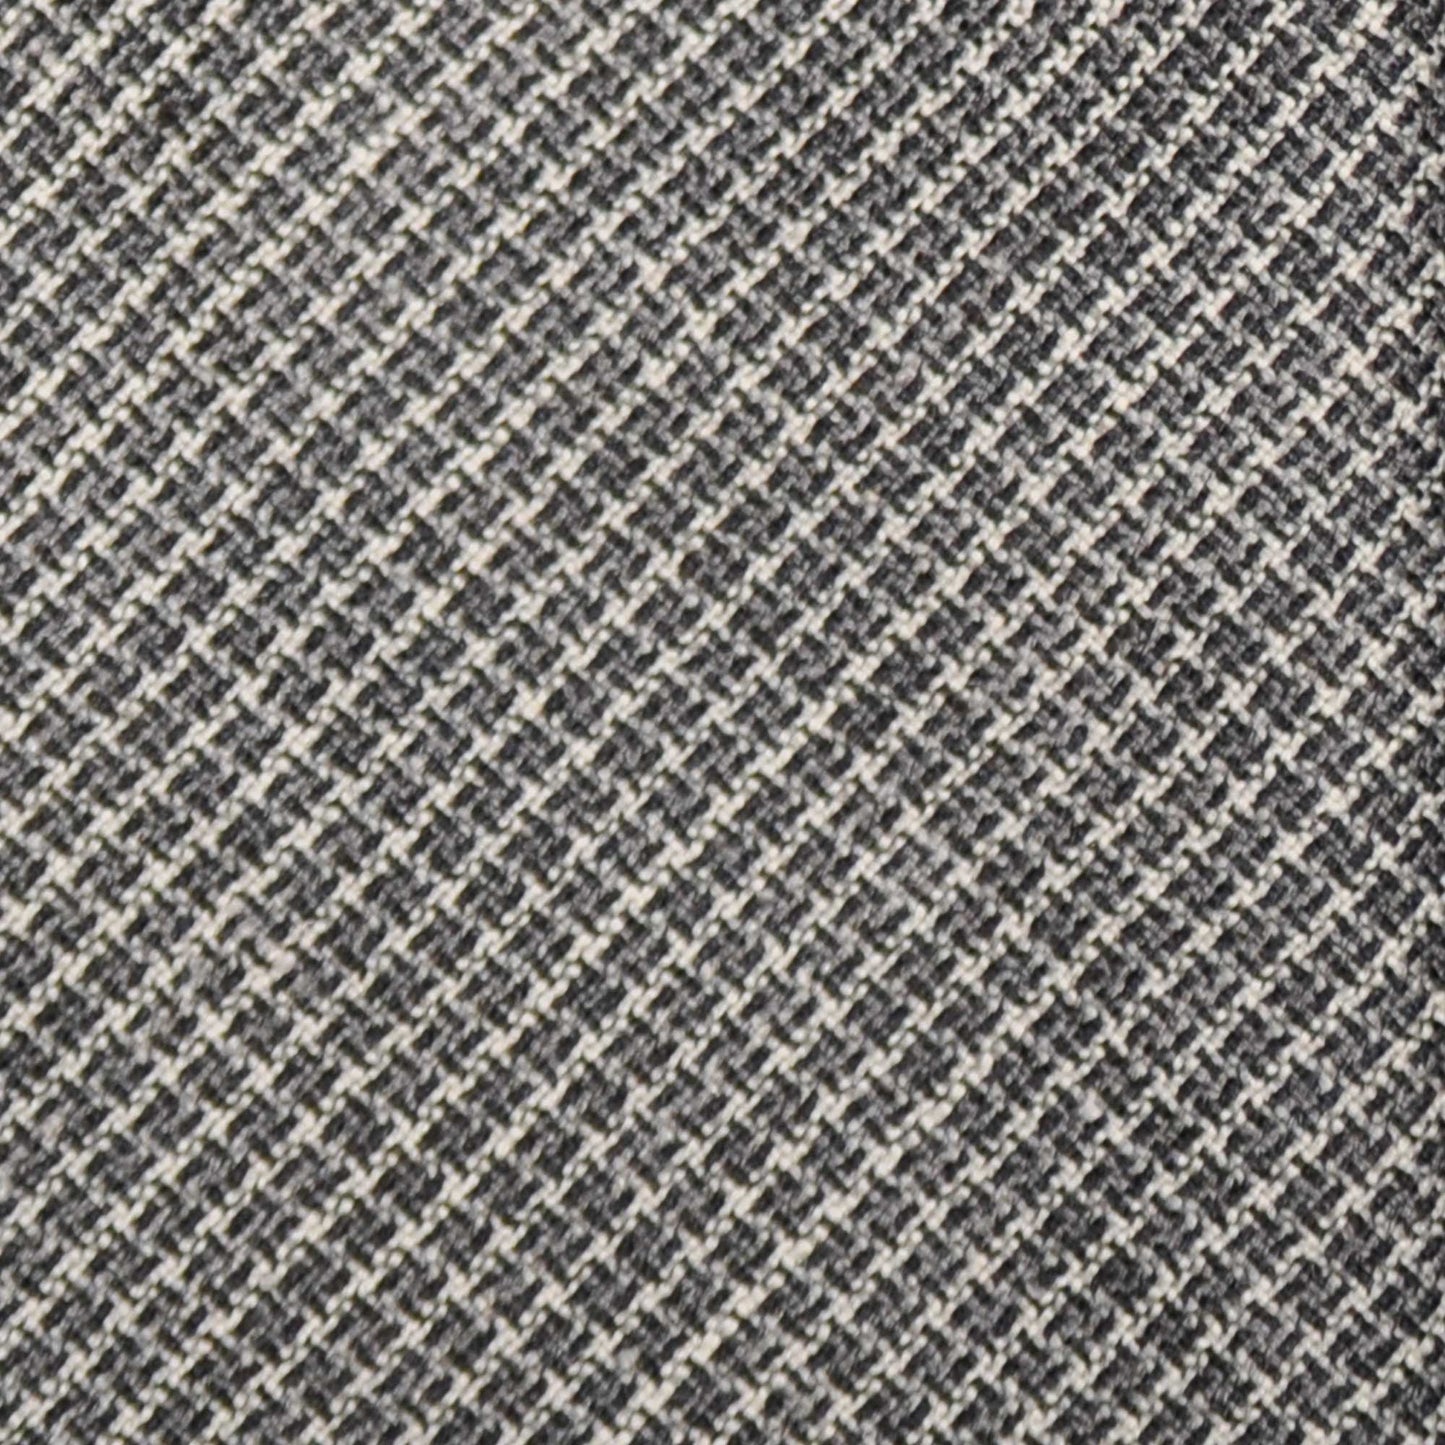 F.Marino Wool Tie 3 Folds Micro Textured Squares Stone Grey-Wools Boutique Uomo